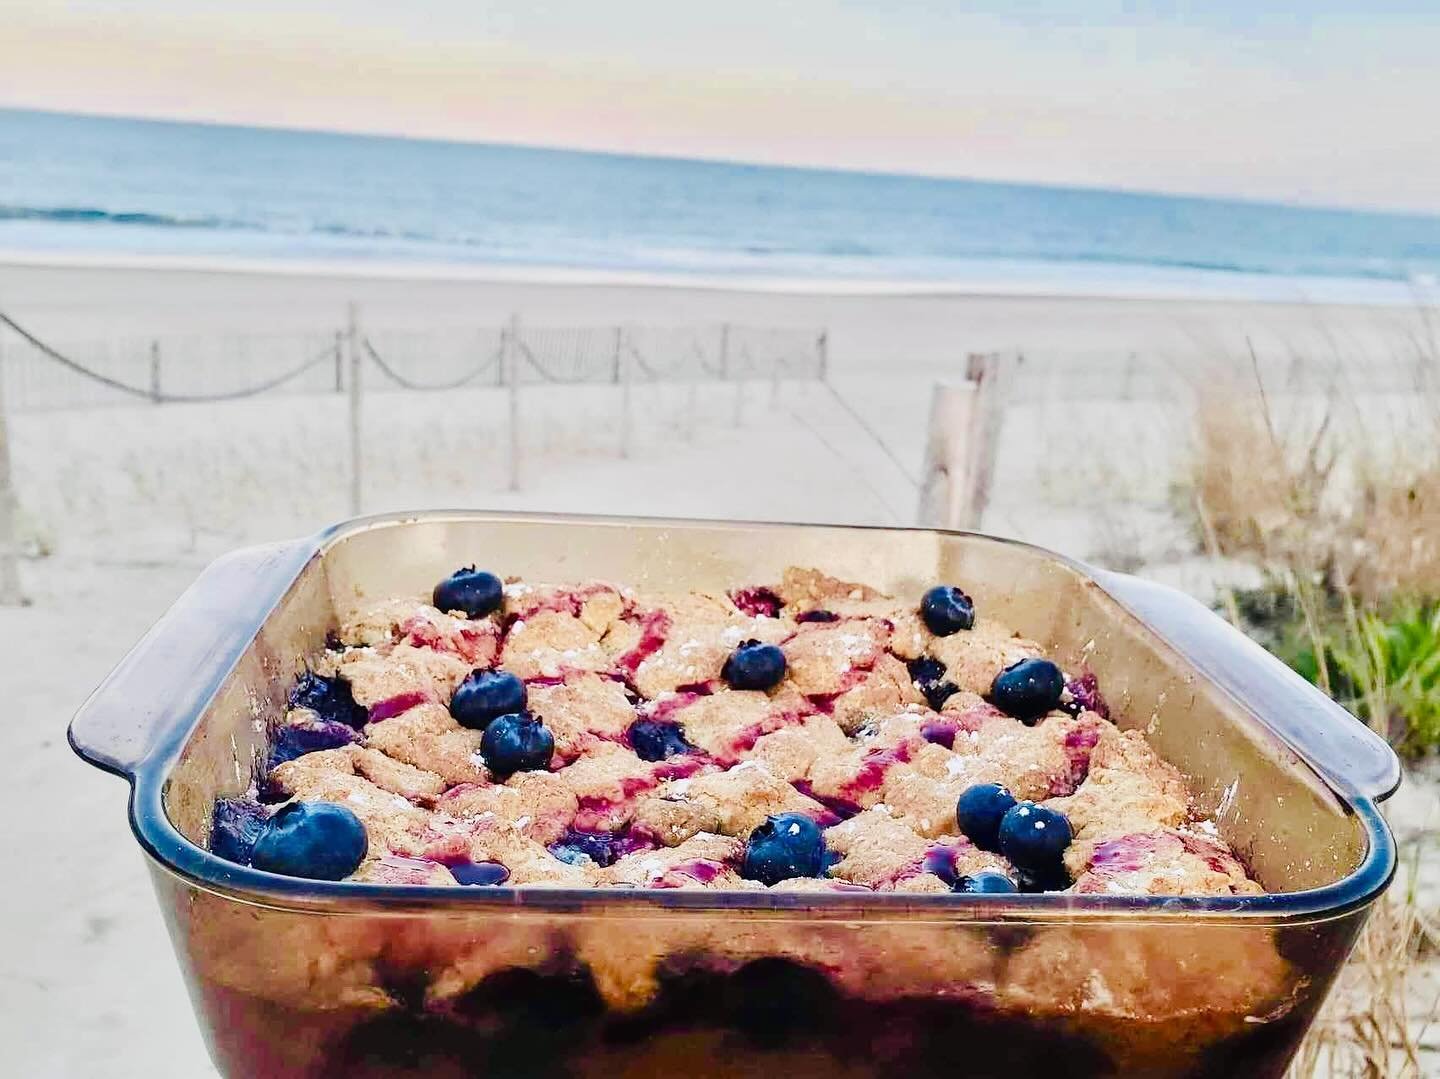 Our famous Blueberry Buckle Cake. Fresh Blueberry Sauce. Made in house. Available for  purchase via our website and pick-up at Sedona between 5:00pm - 7:00pm. Our address is 26 N Pennsylvania Ave Bethany Beach, DE 19930. Click the link in our bio.